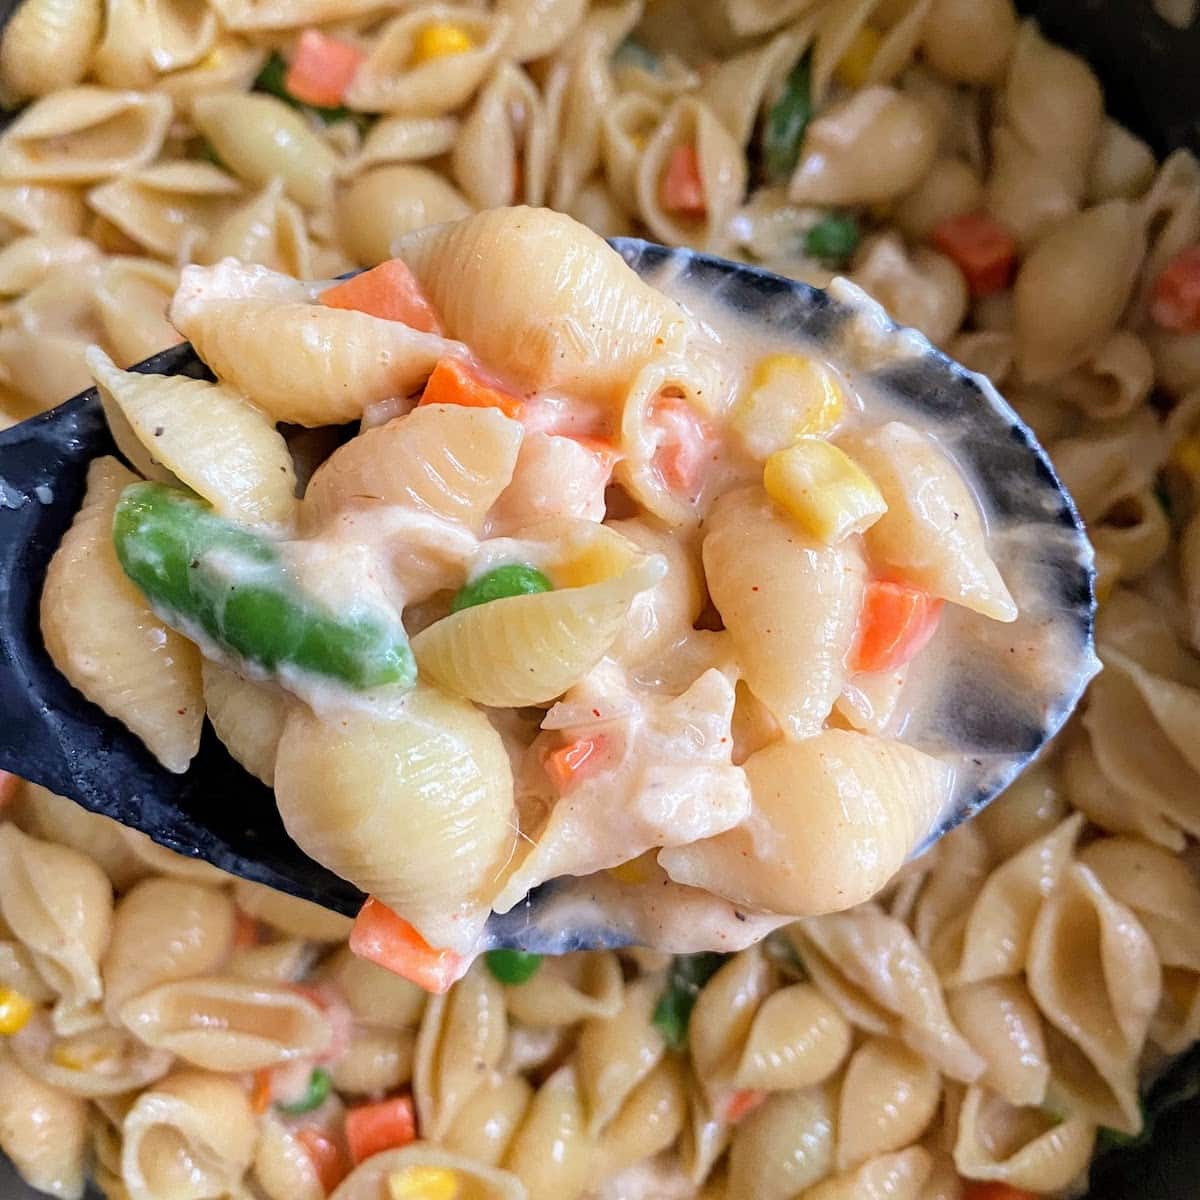 pasta with veggies and cheese sauce in spoon